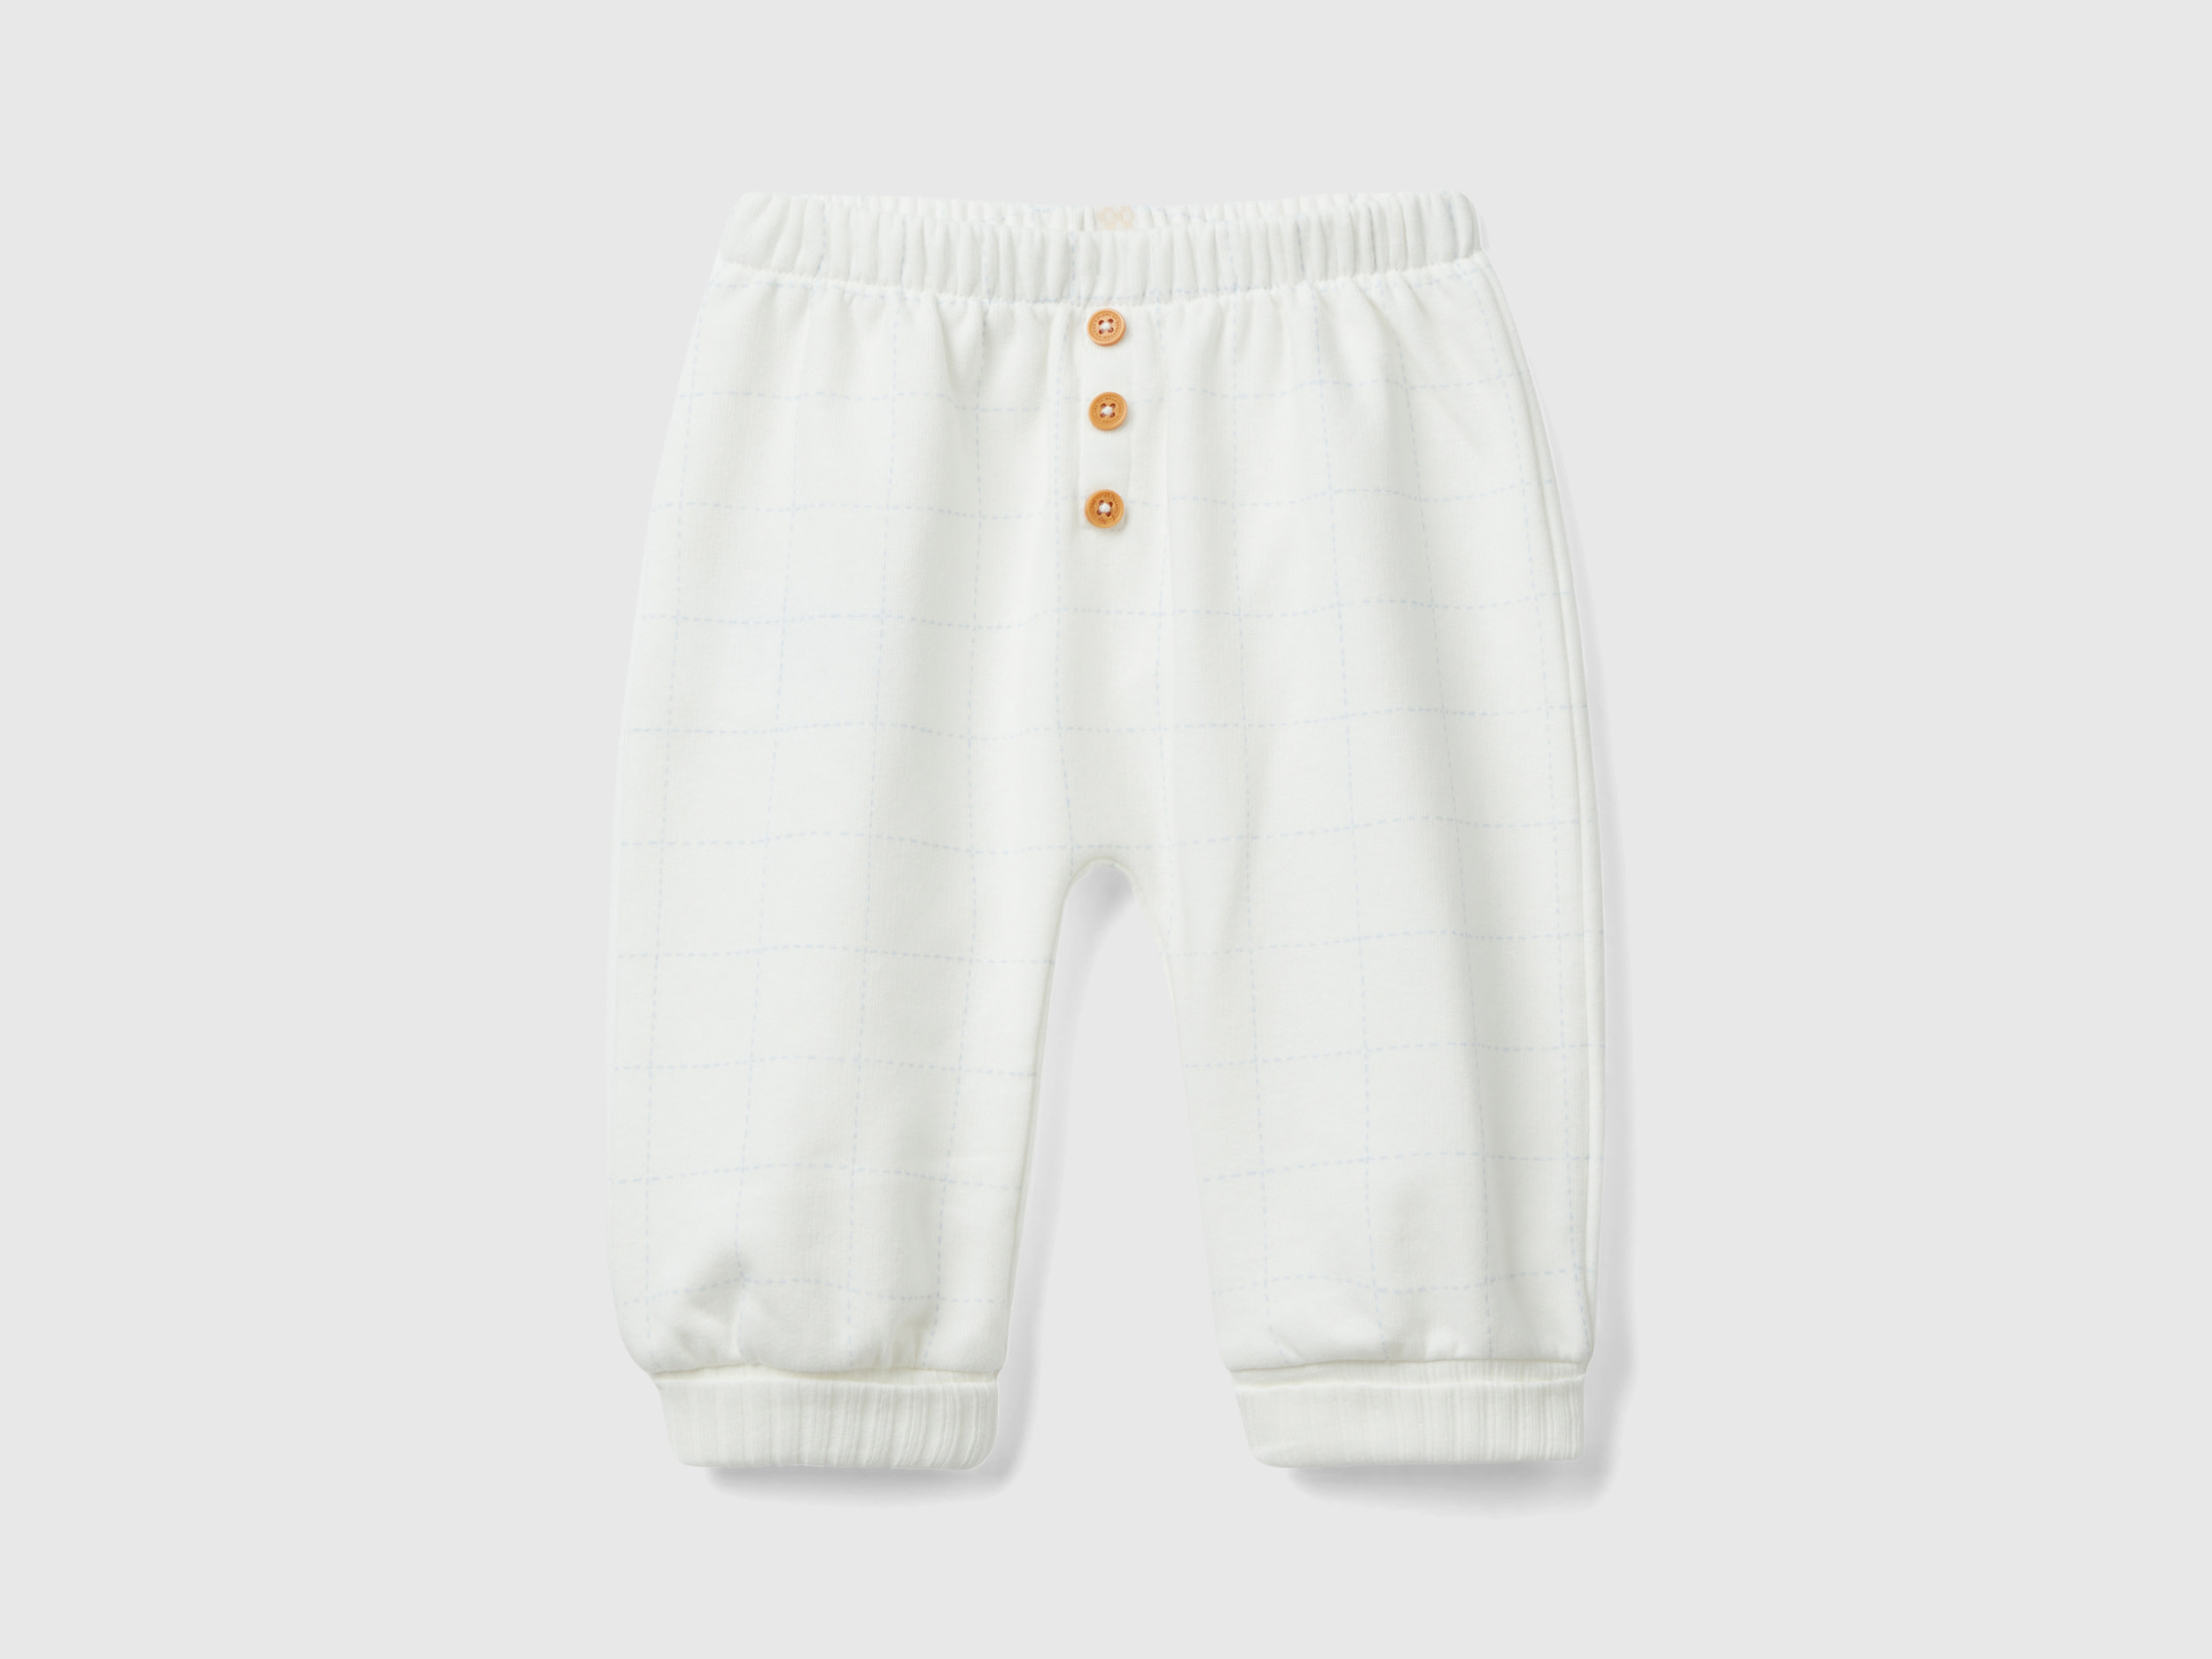 Benetton, Sweatpants With Buttons, size 3-6, Creamy White, Kids